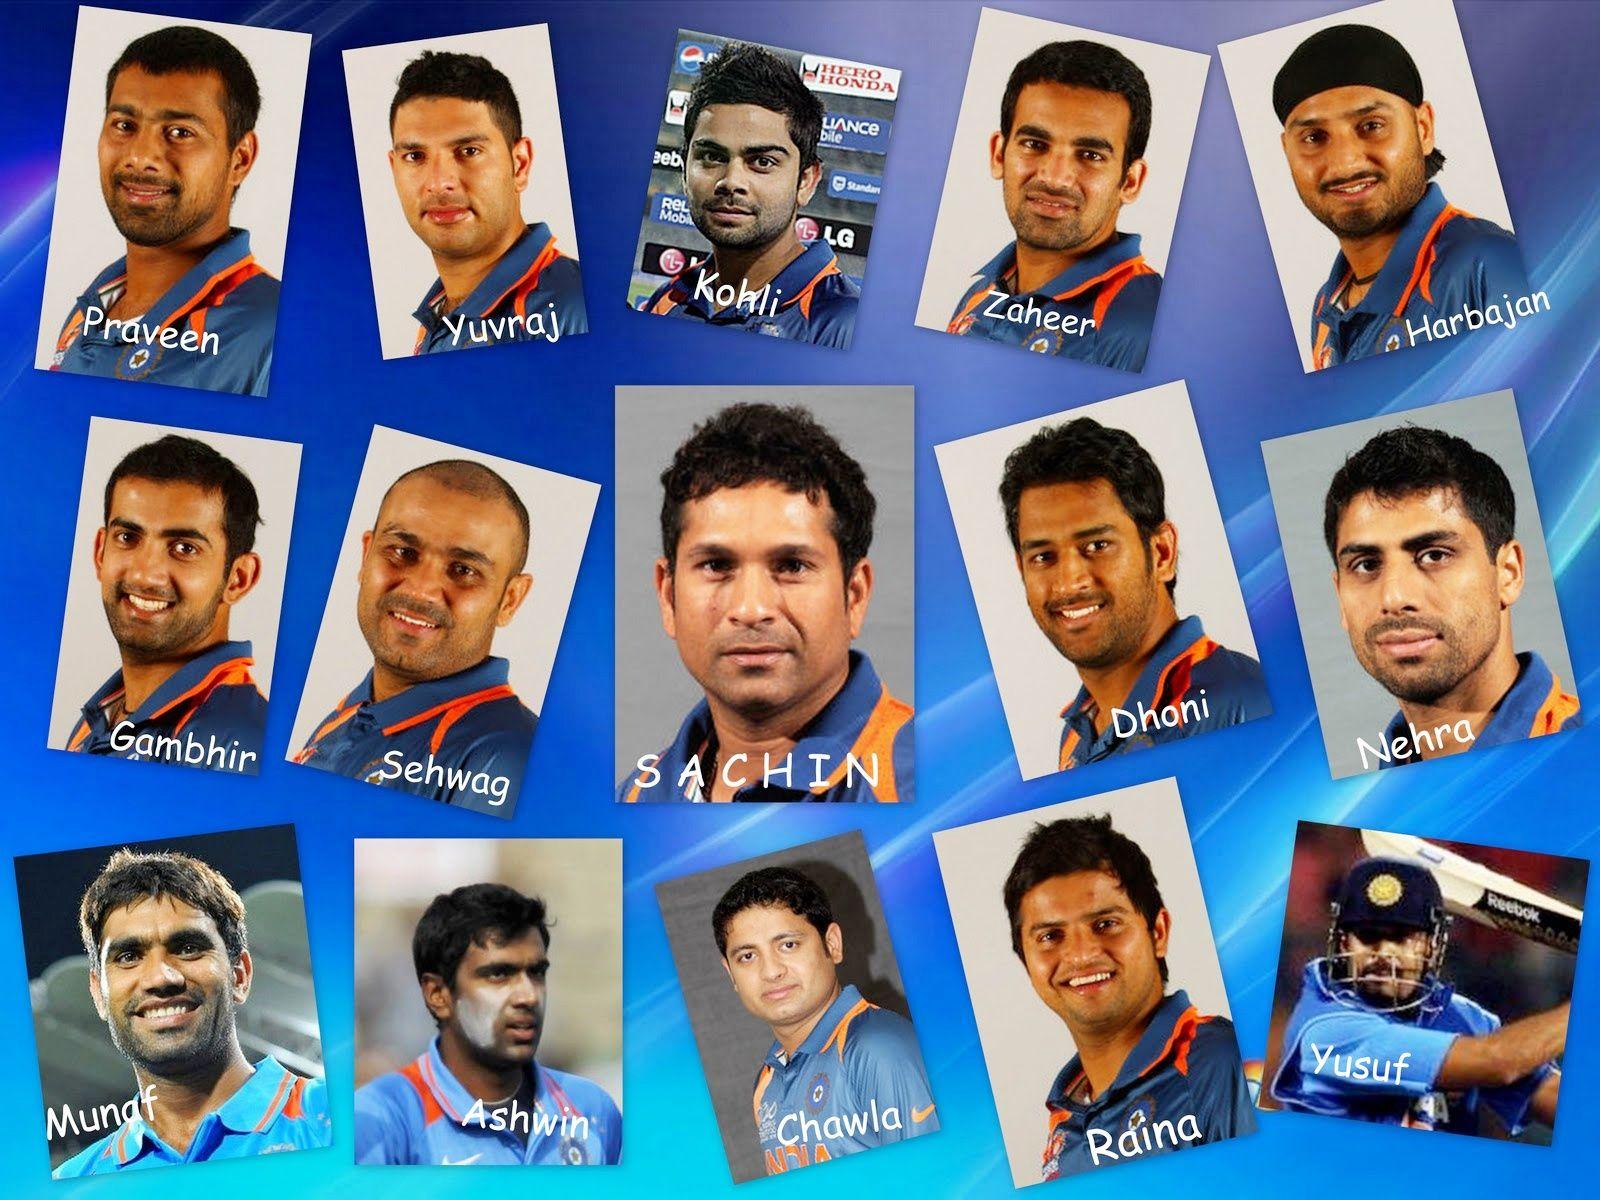 Team India World Cup Wallpaper. HD Wallpaper. Rugby world